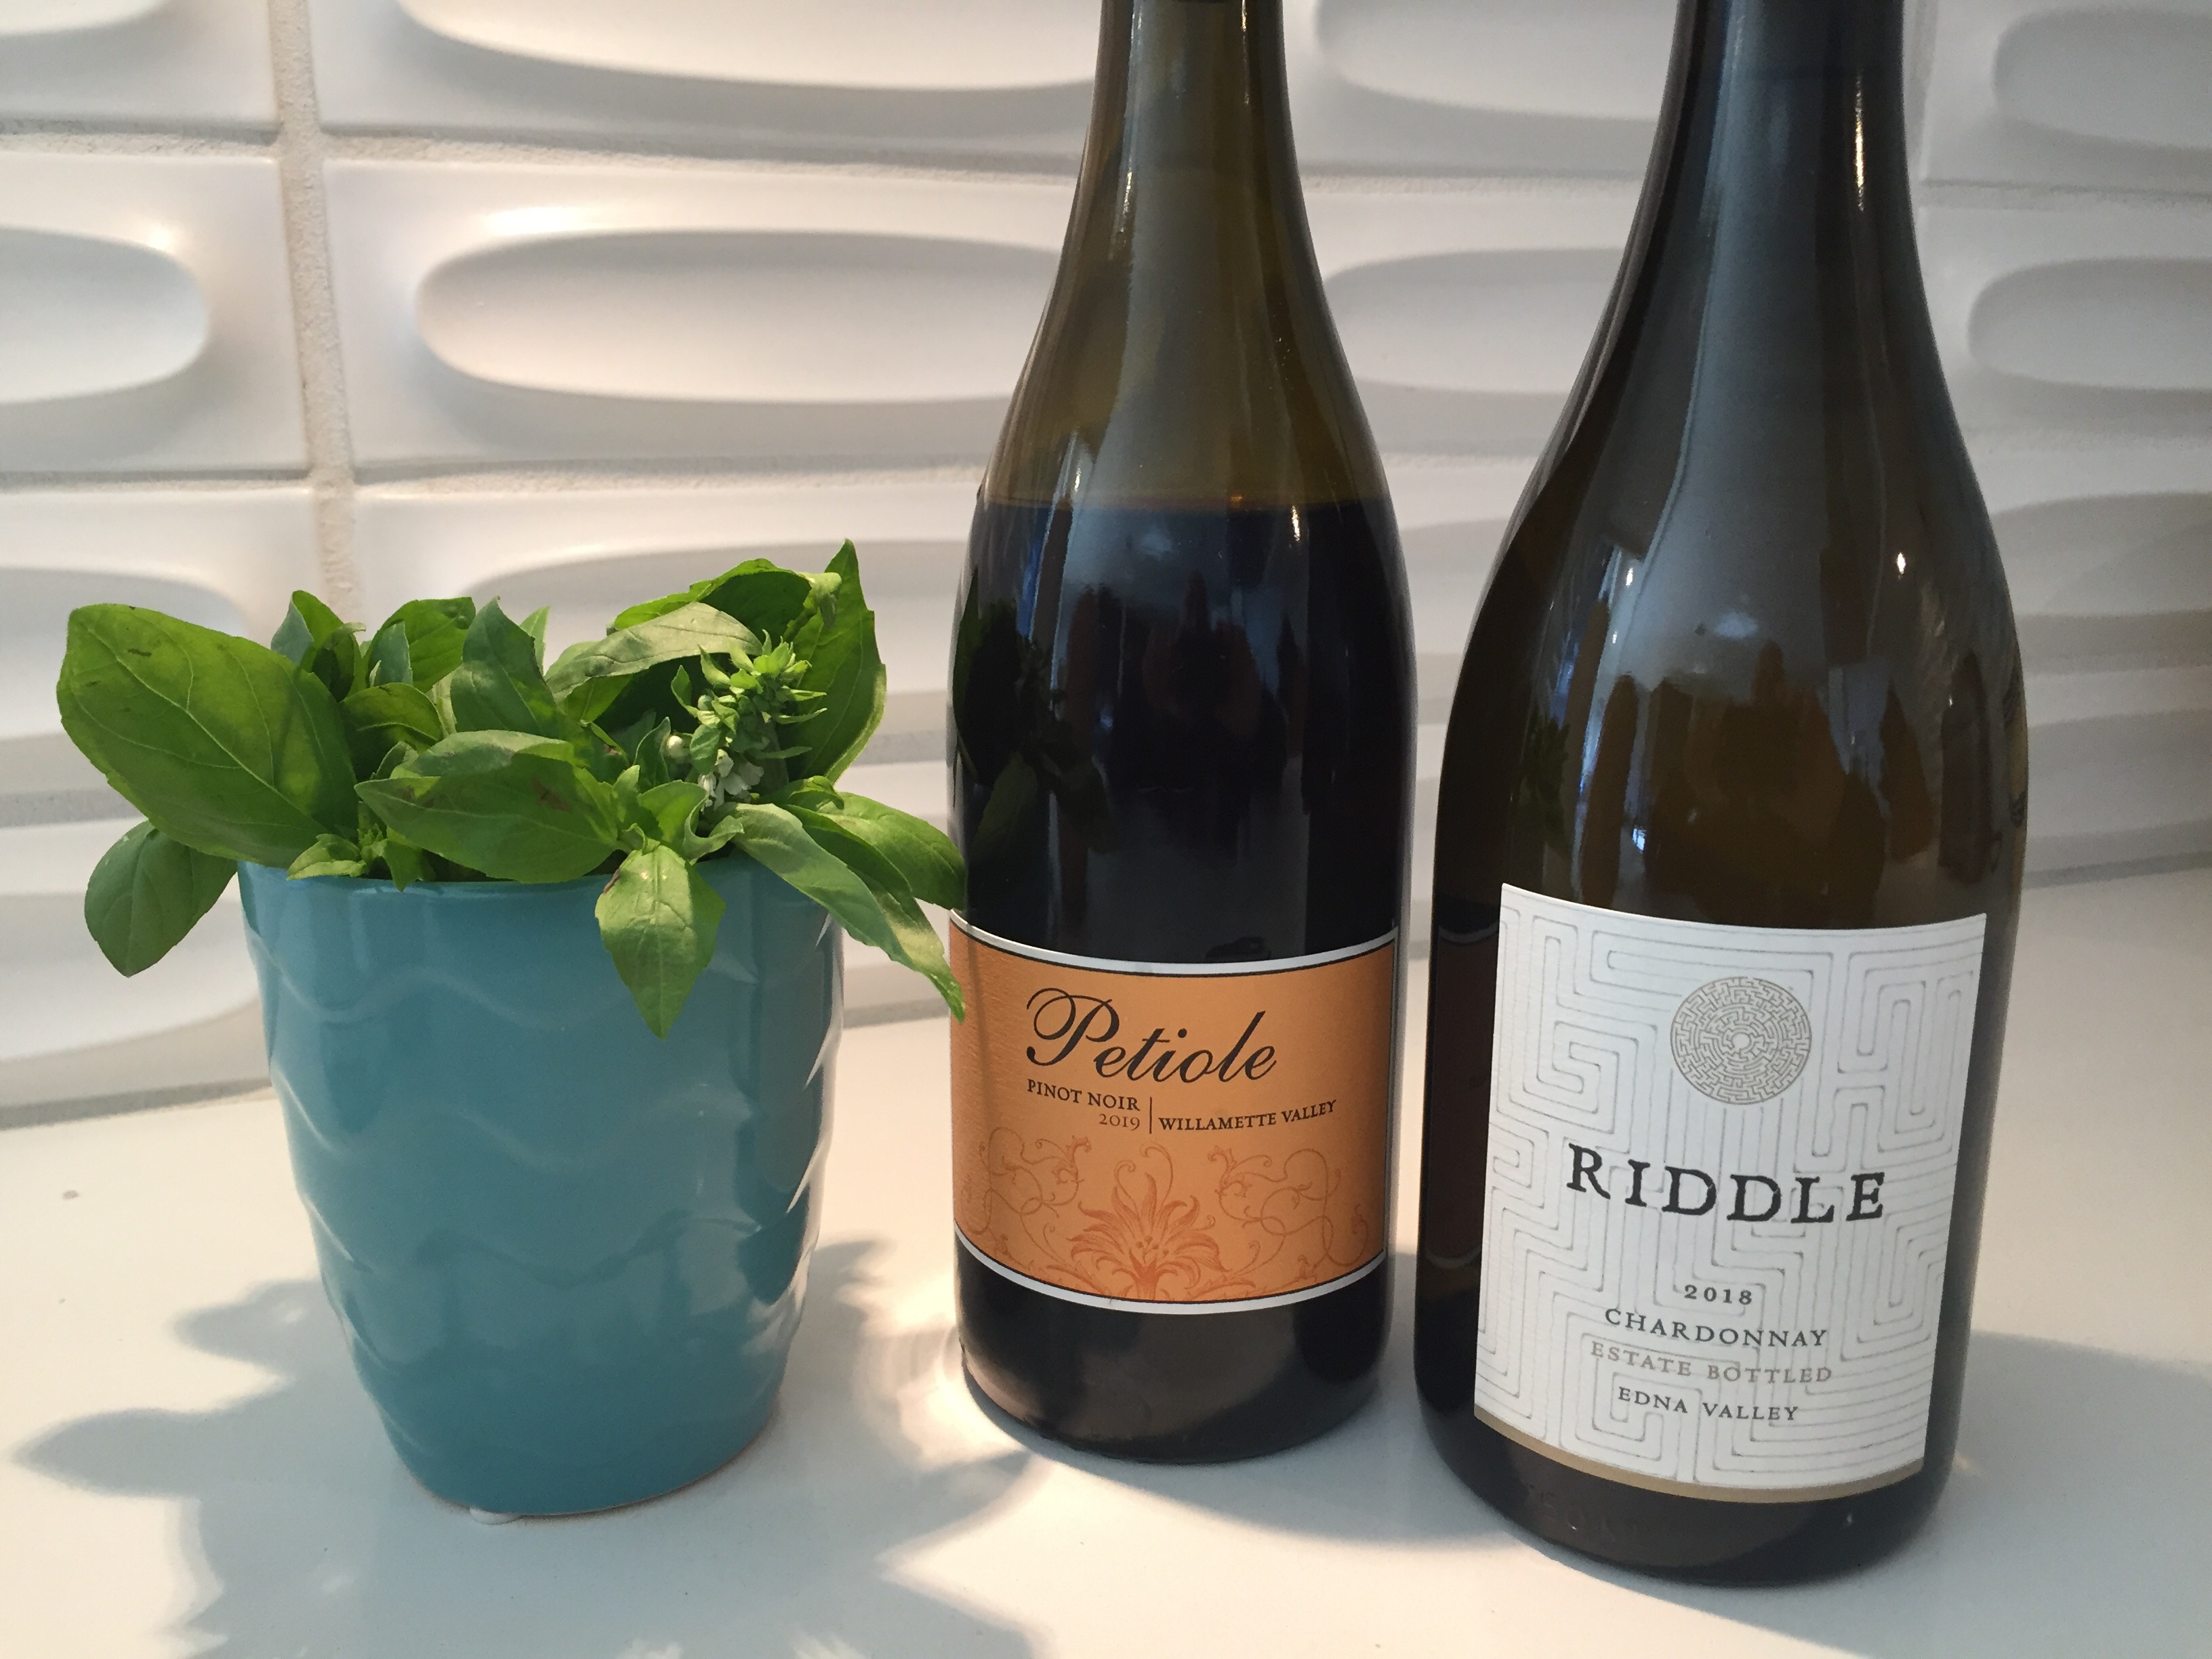 Bottle of 2019 Petiole Pinot Noir and 2018 Riddle Chardonnay from Trader Joe's